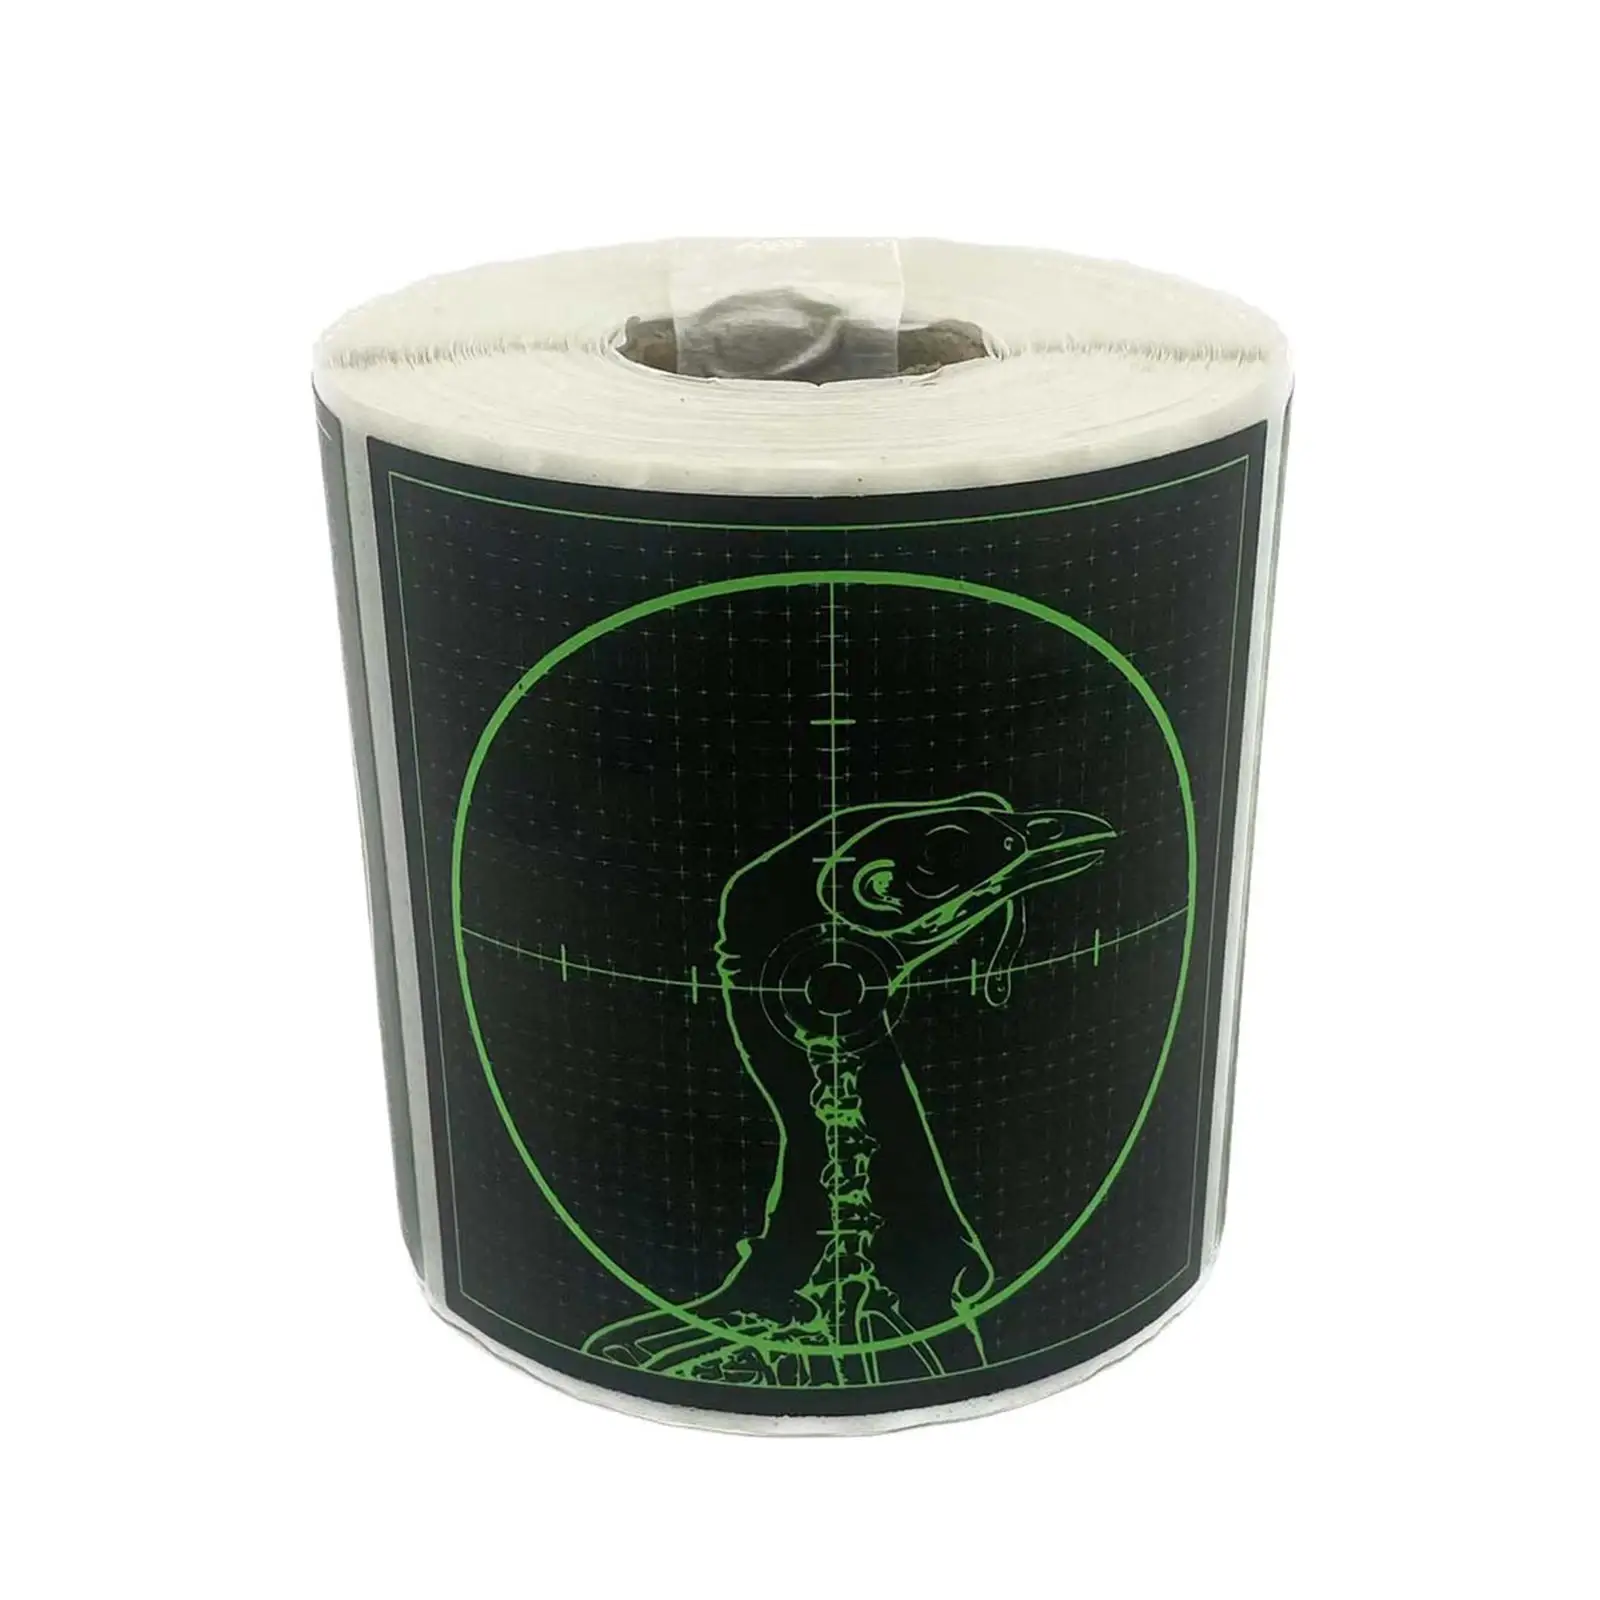 Splatter Reactive Targets High Visibility Paste 1Pc Shooting Targets Paper Targets for Archery Hunting Shooting Range Practice